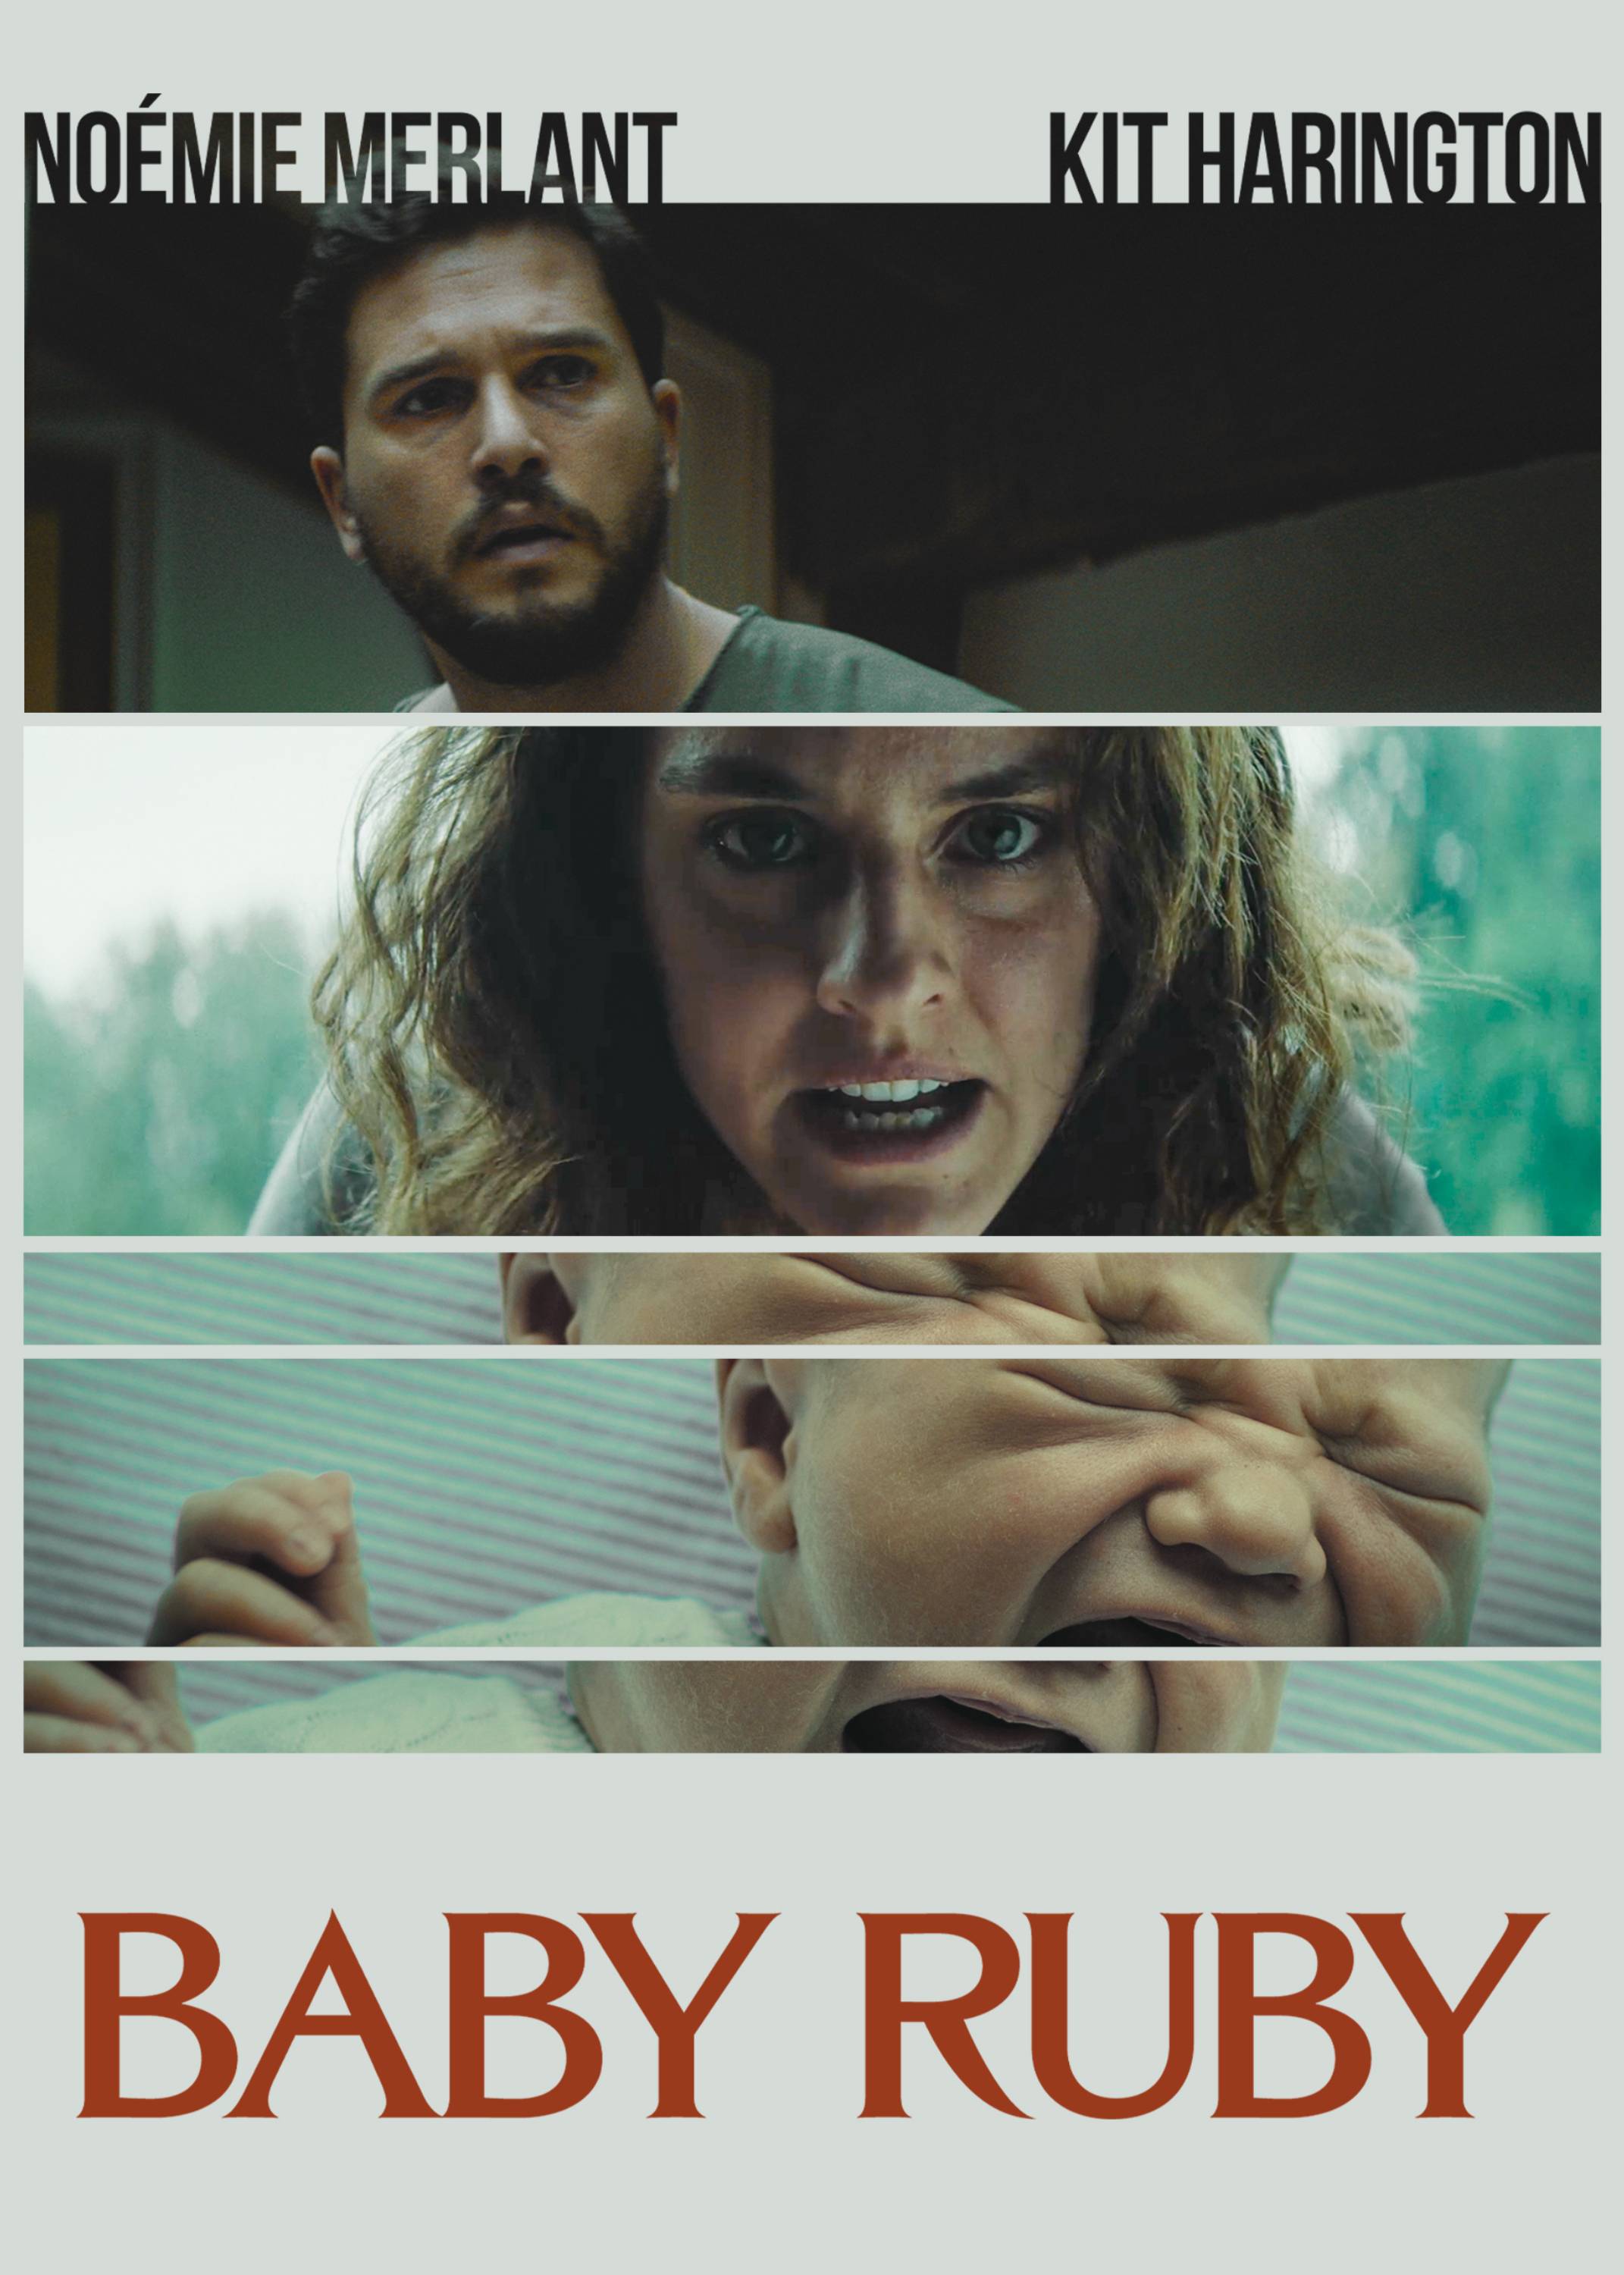 See Noémie Merlant and Kit Harrington in 'Baby Ruby